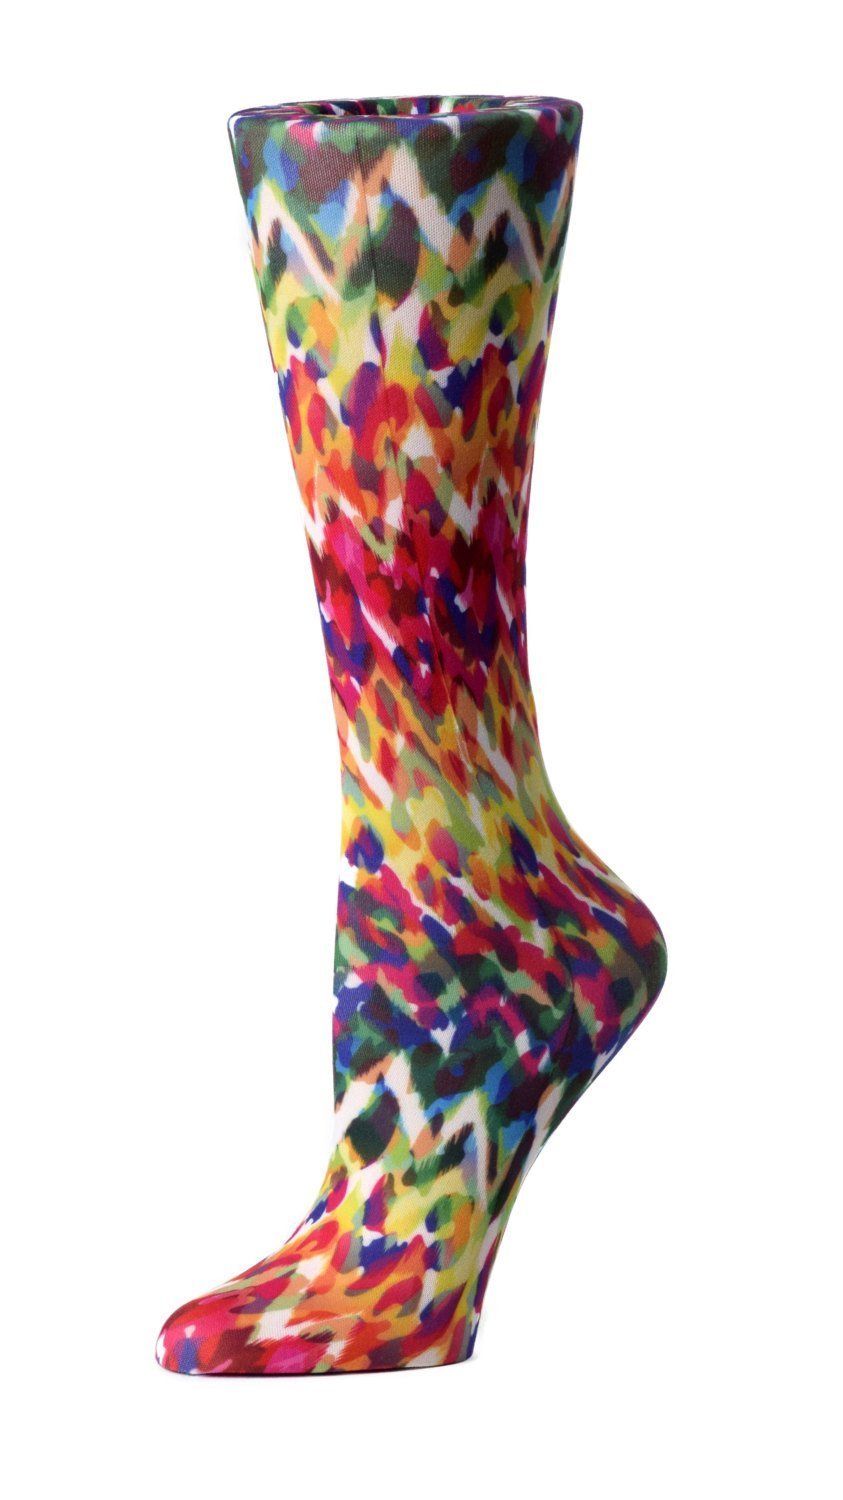 Cutieful Moderate Compression Socks 10-18 MMhg Wide Calf Knit Print Pattern Animal Fire at Parker's Clothing and Shoes.